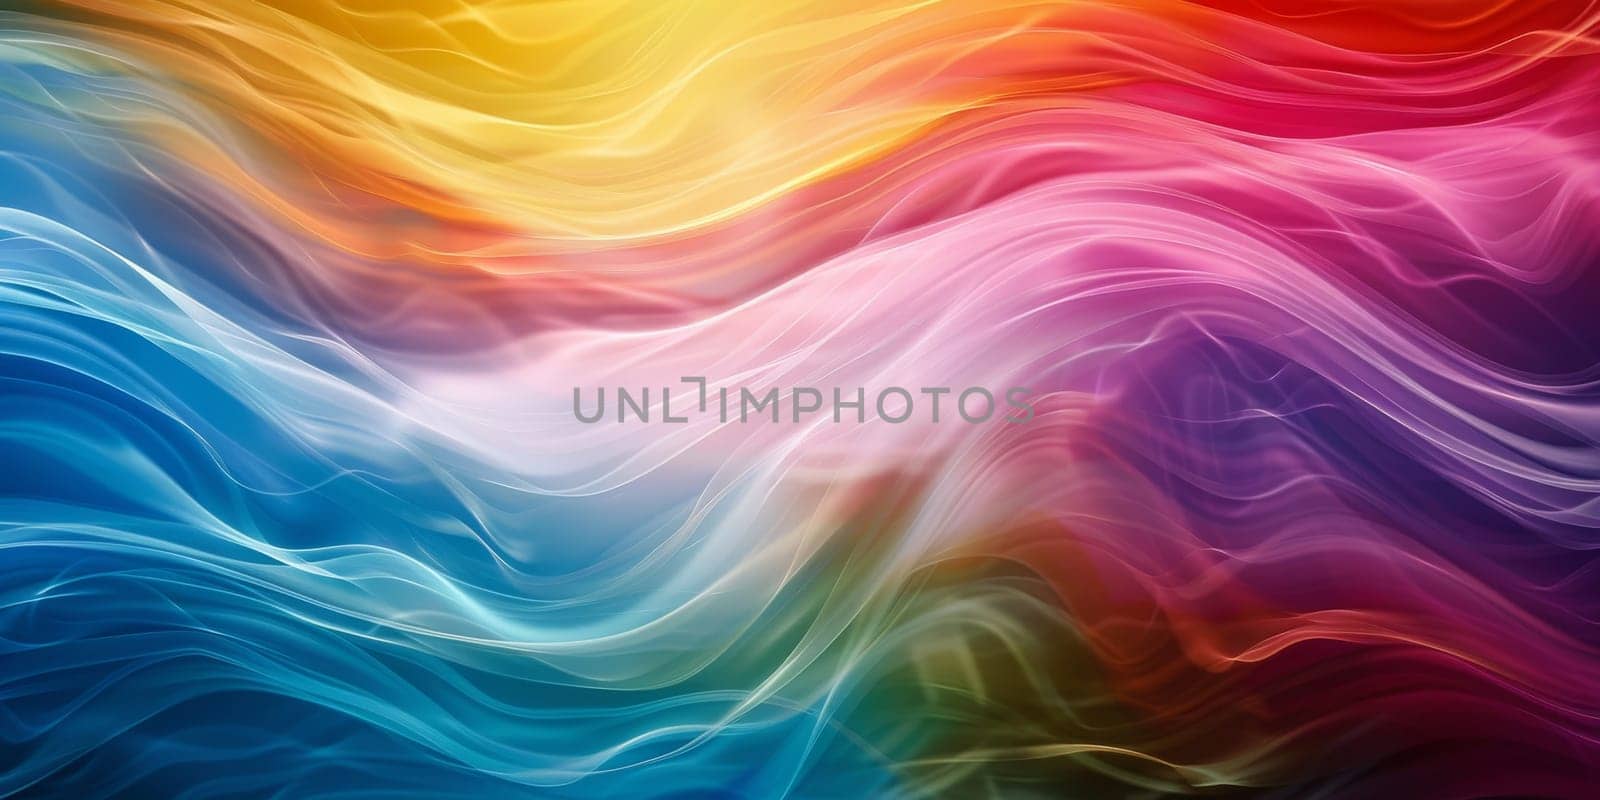 Colorful rainbow background with flowing wavy lines in a various hues and shades